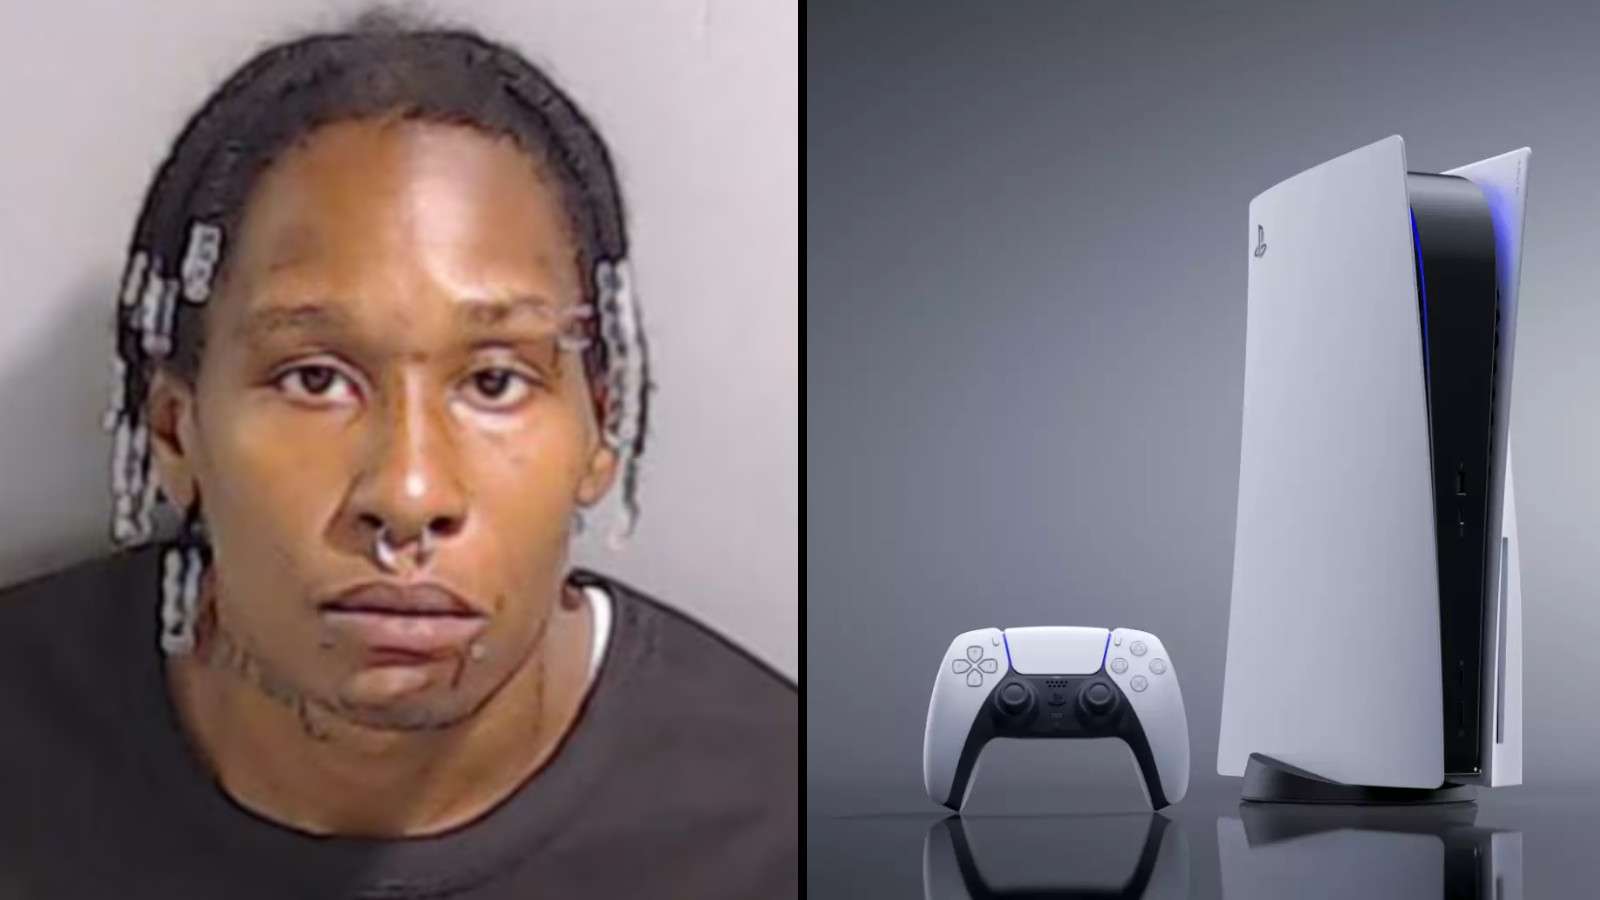 Mother shoots son over video game console